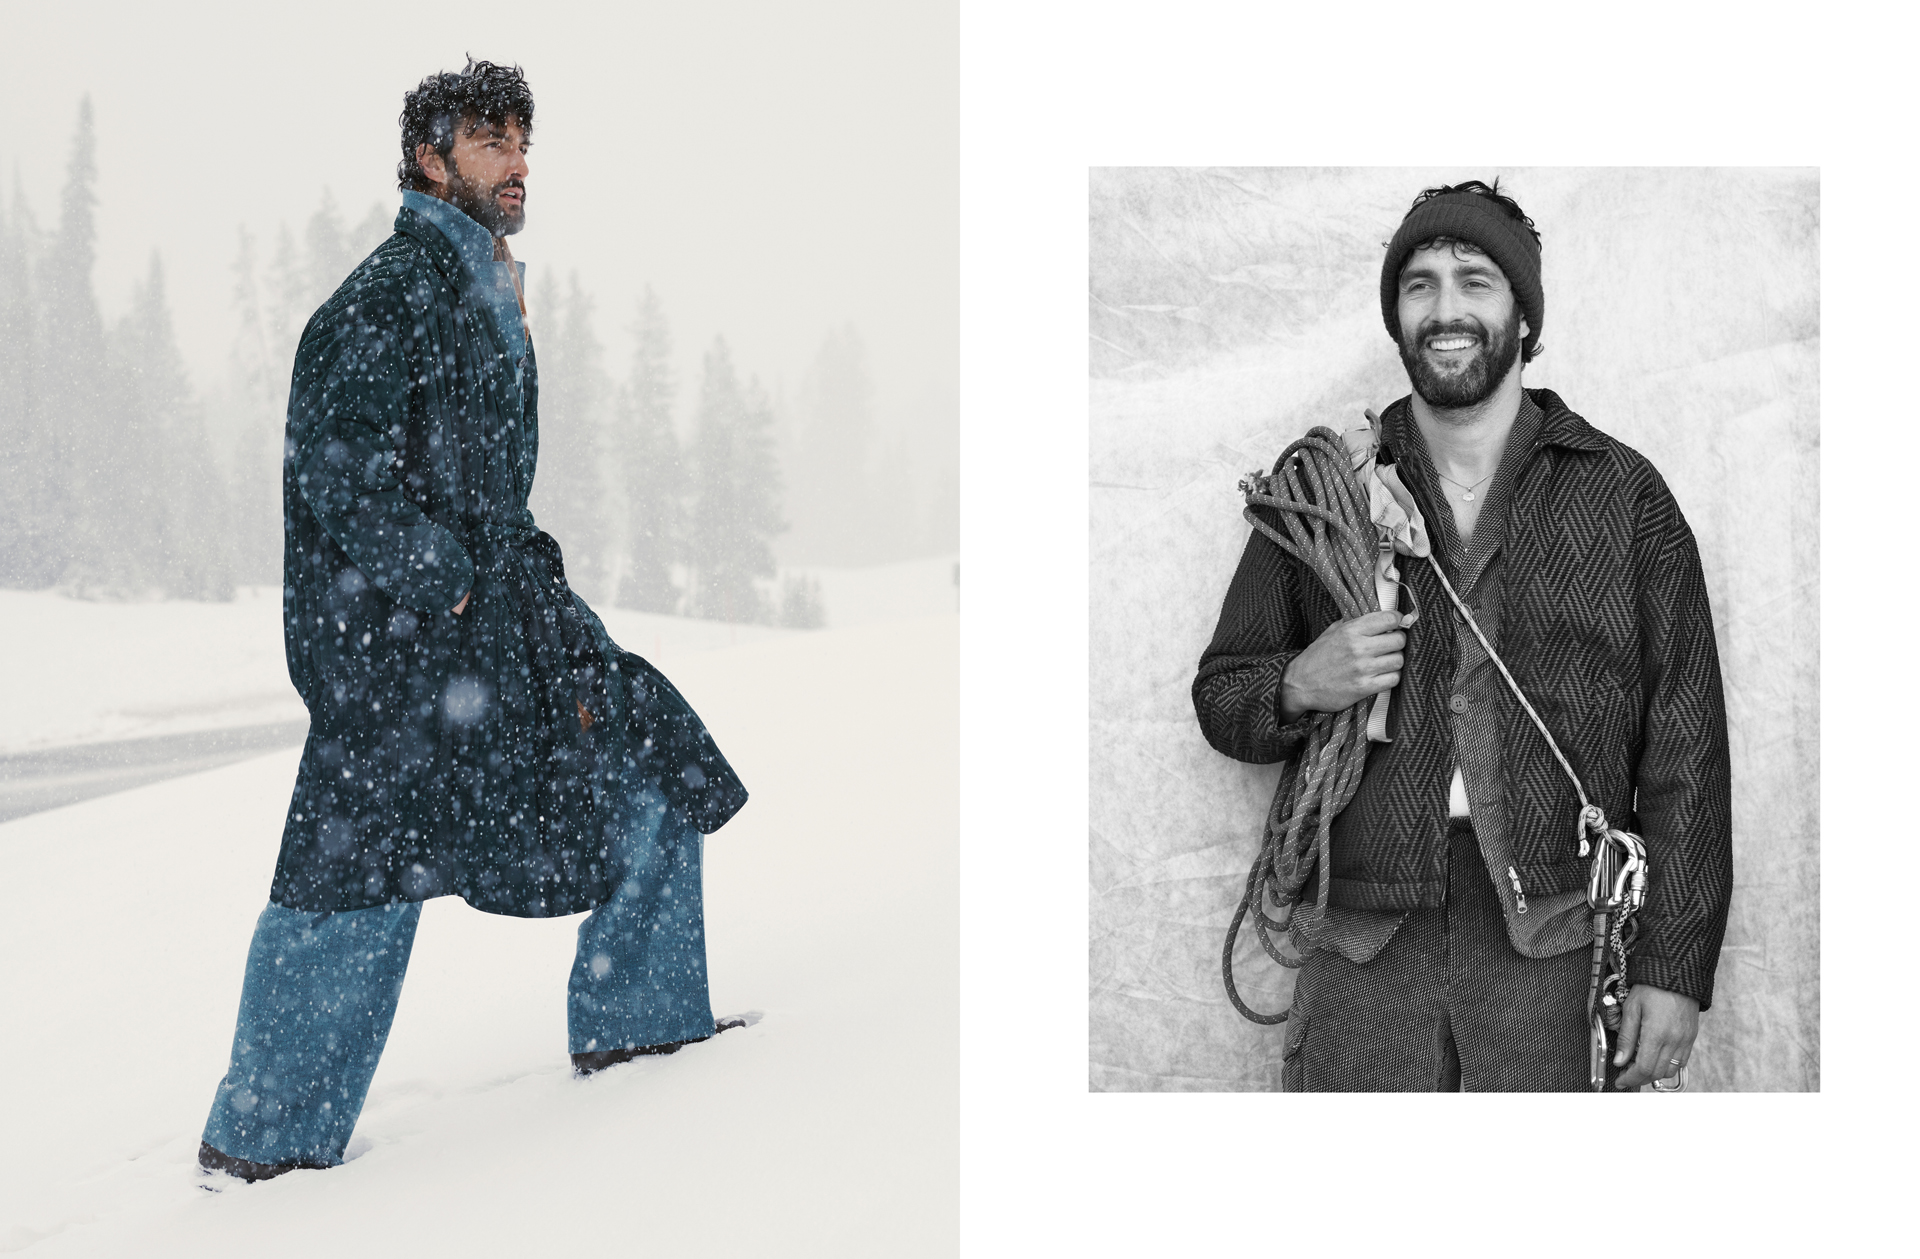  (Left) All clothing Ermenegildo Zegna, boots Danner Mountain // (Right) All clothing Giorgio Armani, Hat CELINE HOMME By Hedi Slimane, ring Bulgari, necklace stylist's own